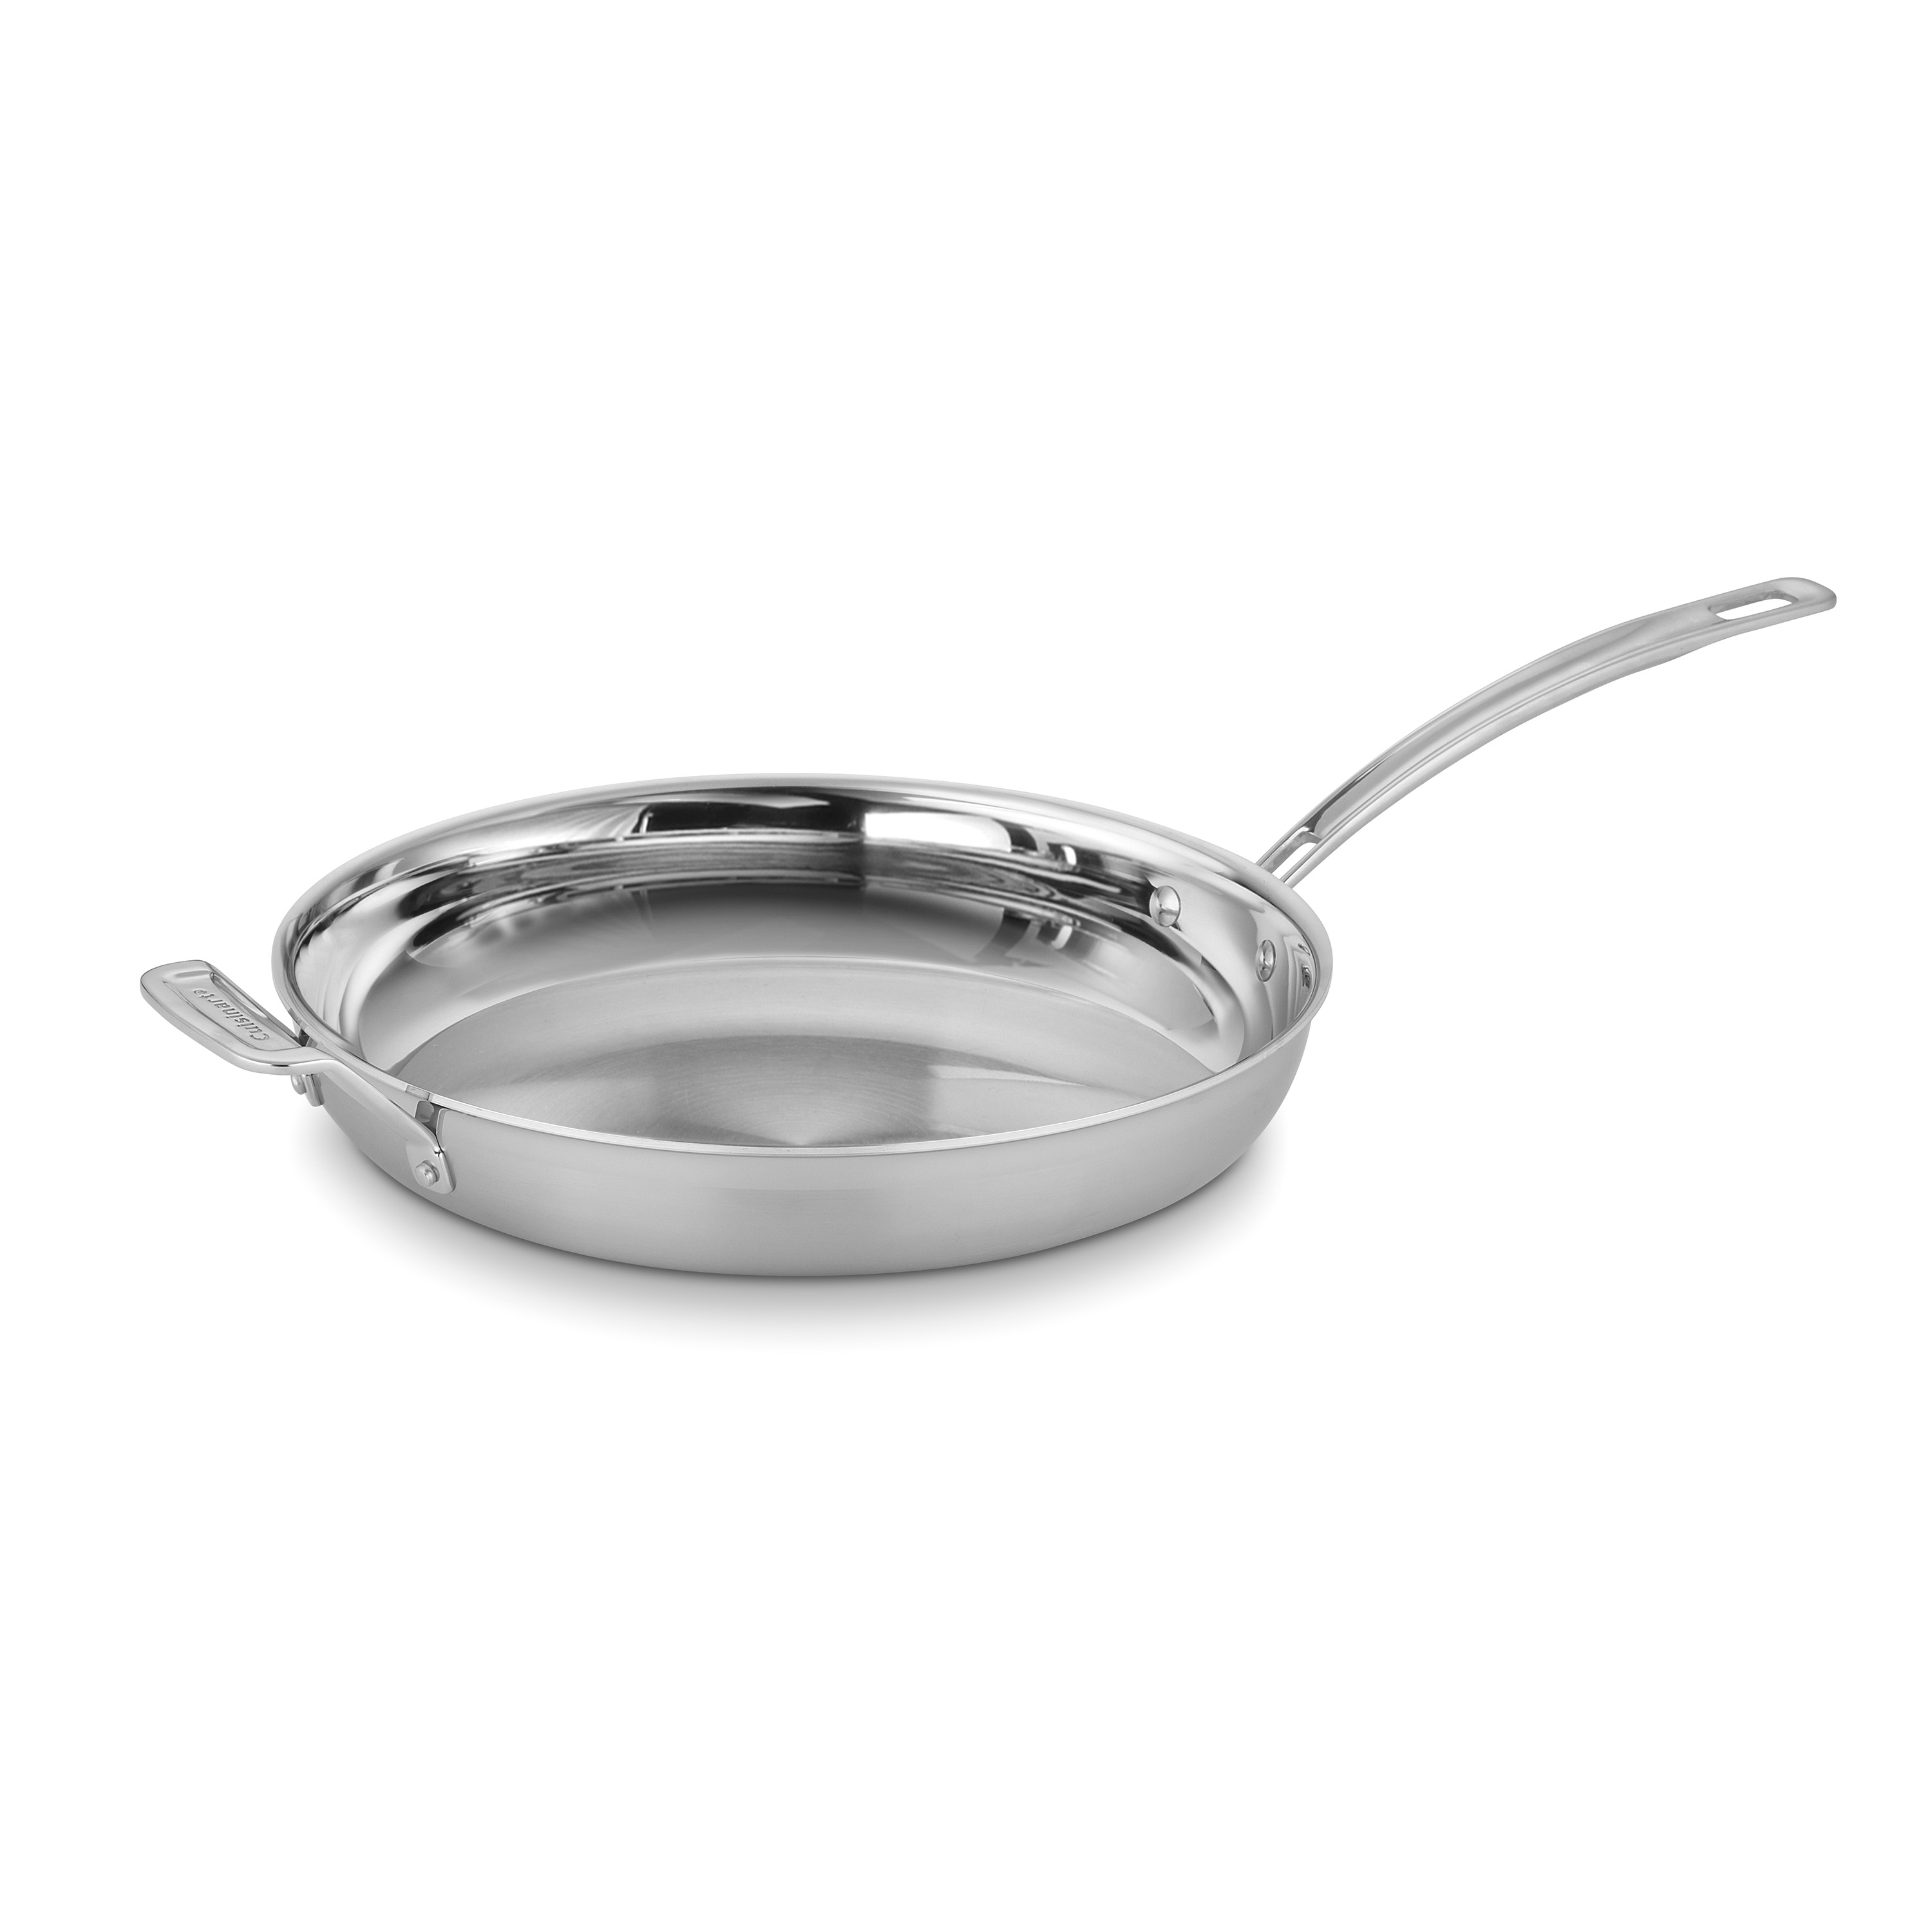 Discontinued MultiClad Pro Triple Ply Stainless Cookware 12'' Skillet with Helper Handle